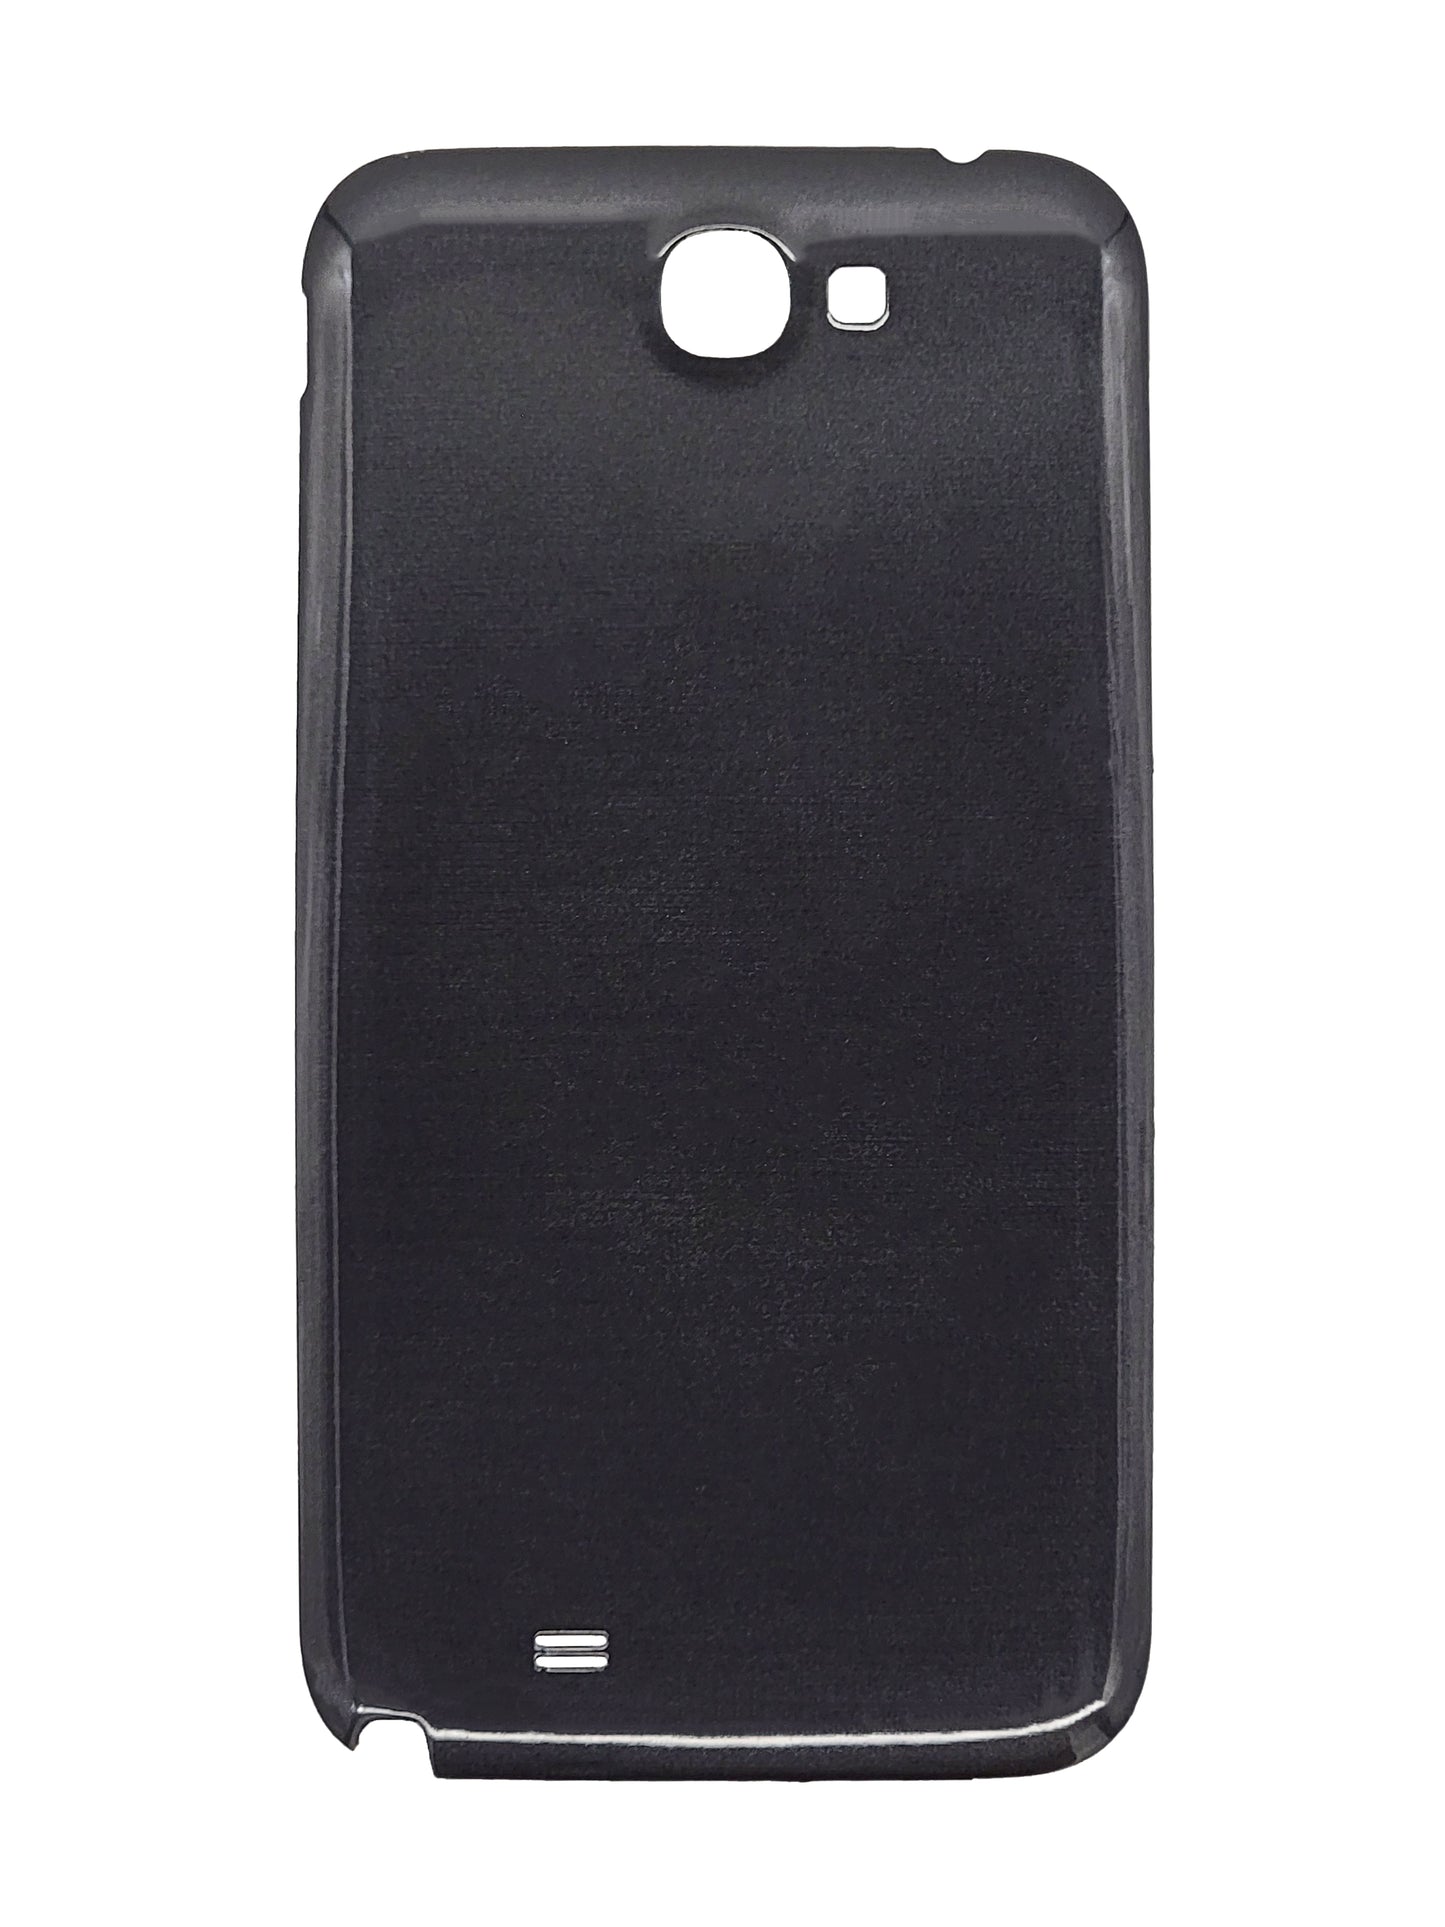 SGN Note 2 Back Cover (Black)